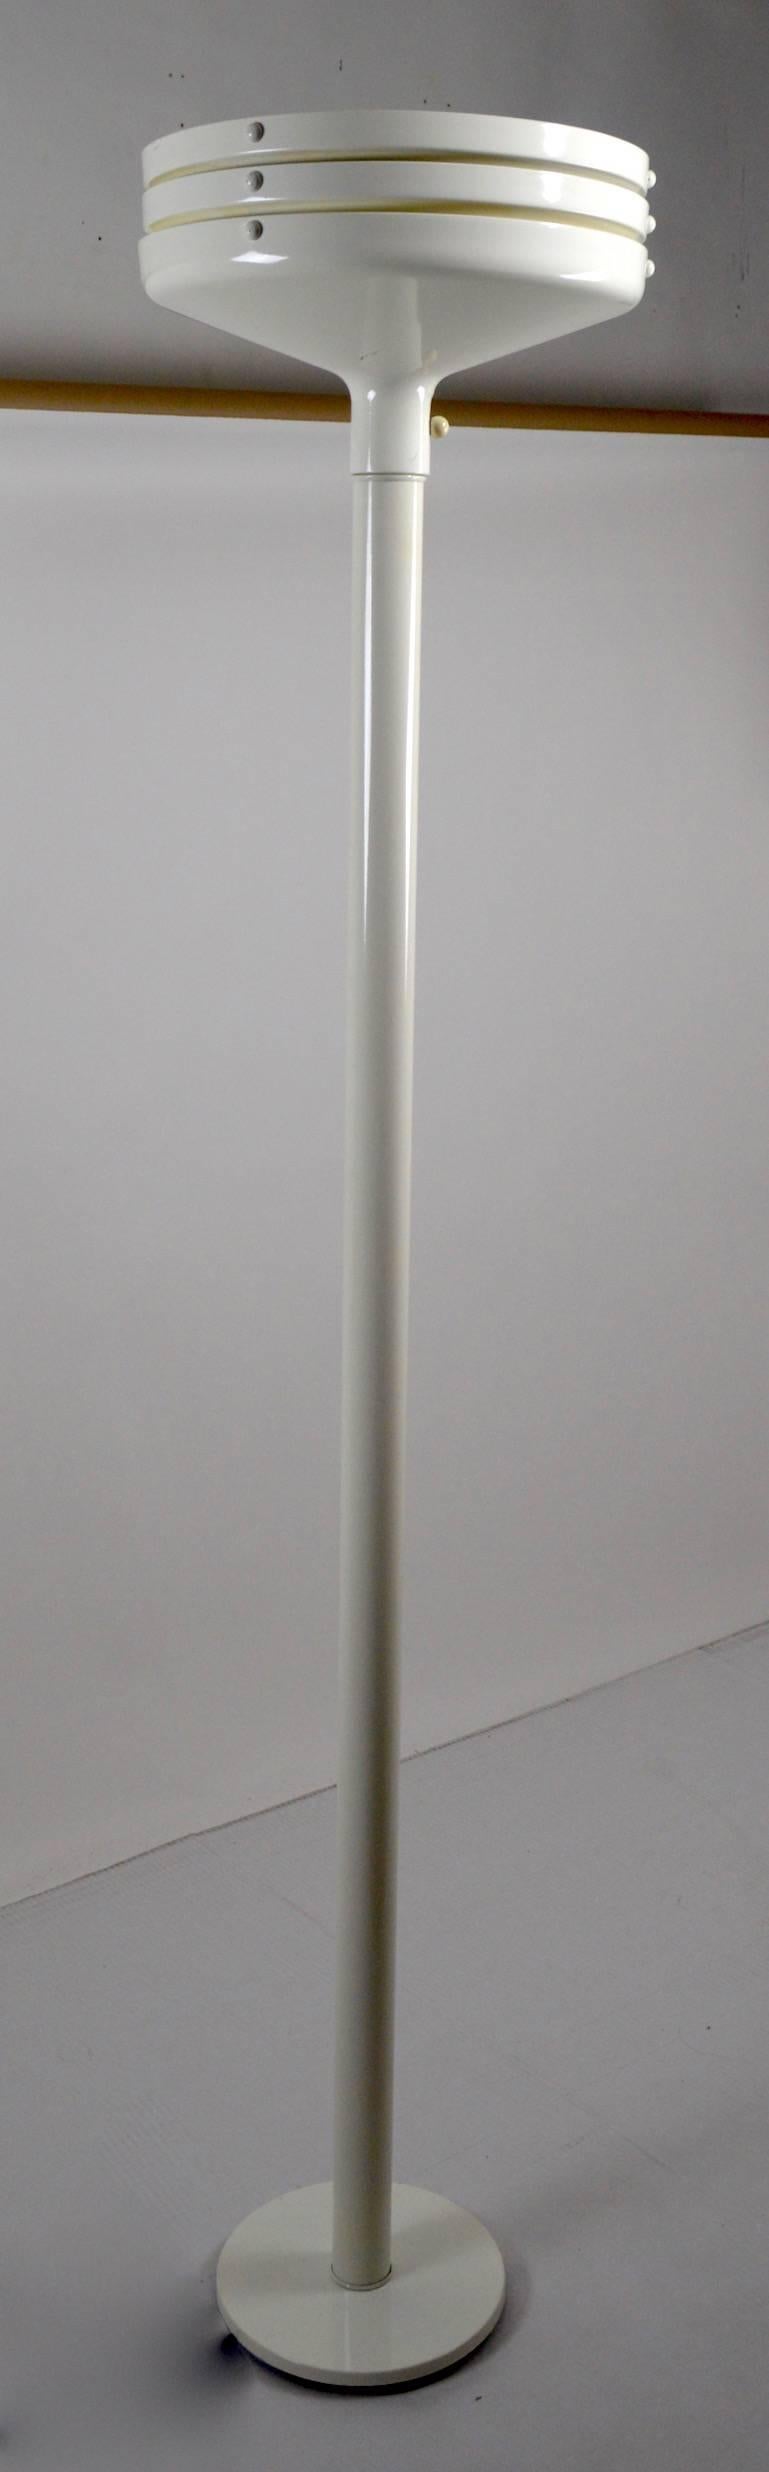 White enameled torchiere probably manufactured by Lightolier. Clean, original, working condition, accepts standard size bulb. Measures: Diameter of base 10.